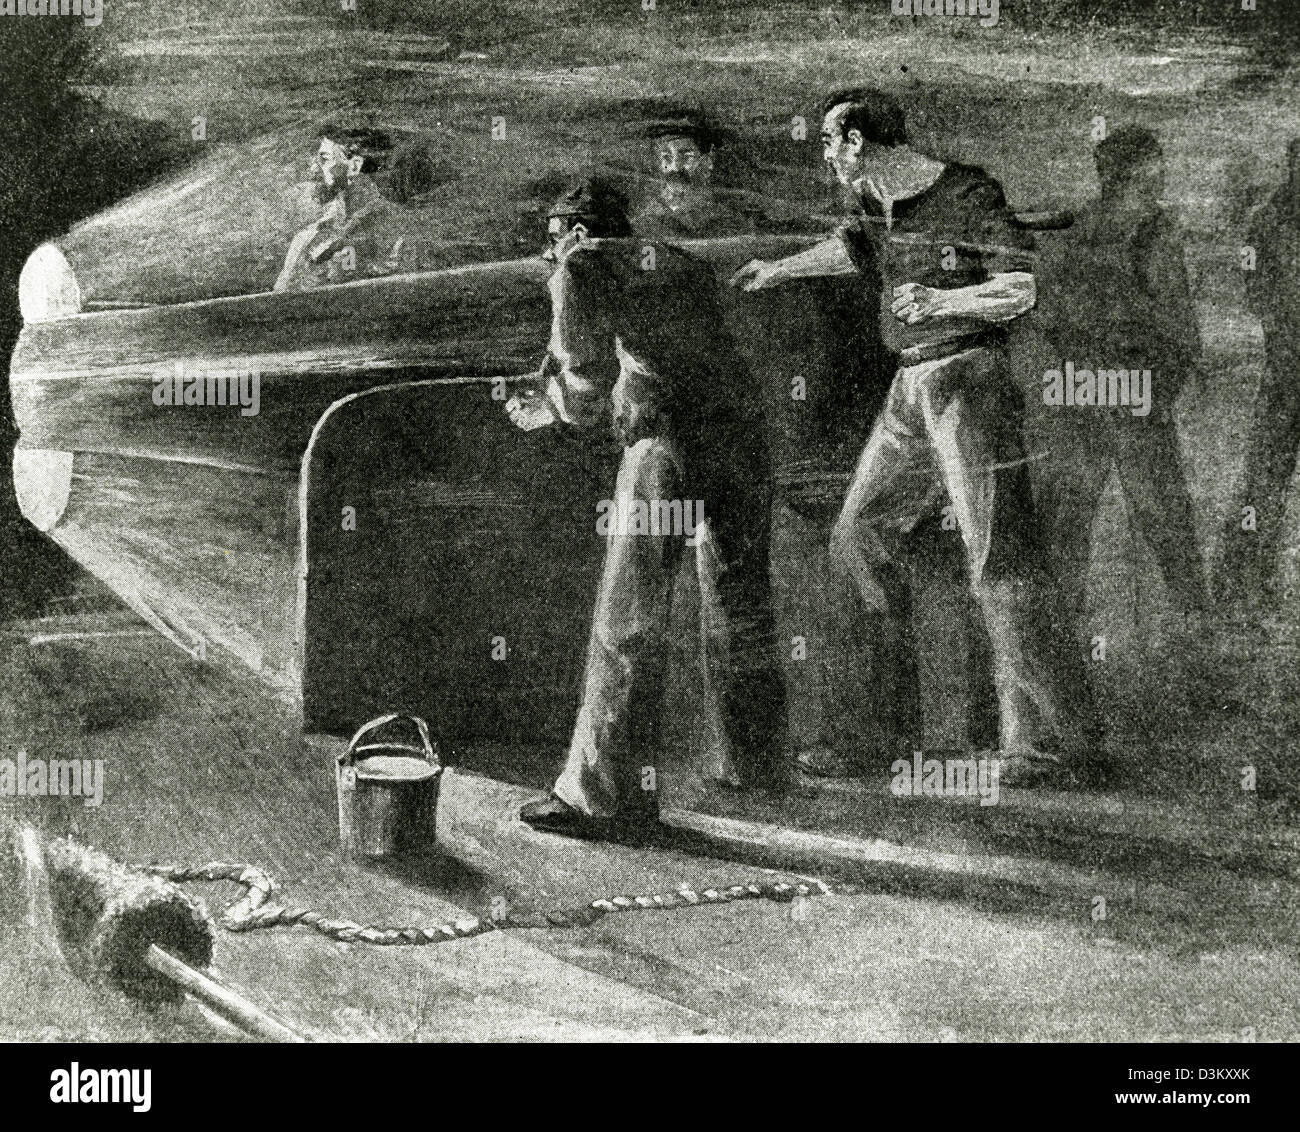 Undated sketch of the scene inside the ironclad warship USS Monitor during battle with the Confederate warship CSS Virginia. The Brooklyn-built Monitor made nautical history after being designed and assembled in 118 days, and then commissioned Feb. 25, 1862. Fighting in the first battle between two ironclads in the Battle of Hampton Roads, March 9, 1862, the engagement marked the first time iron-armored ships clashed in naval warfare and signaled the end of the era of wooden ships. Stock Photo